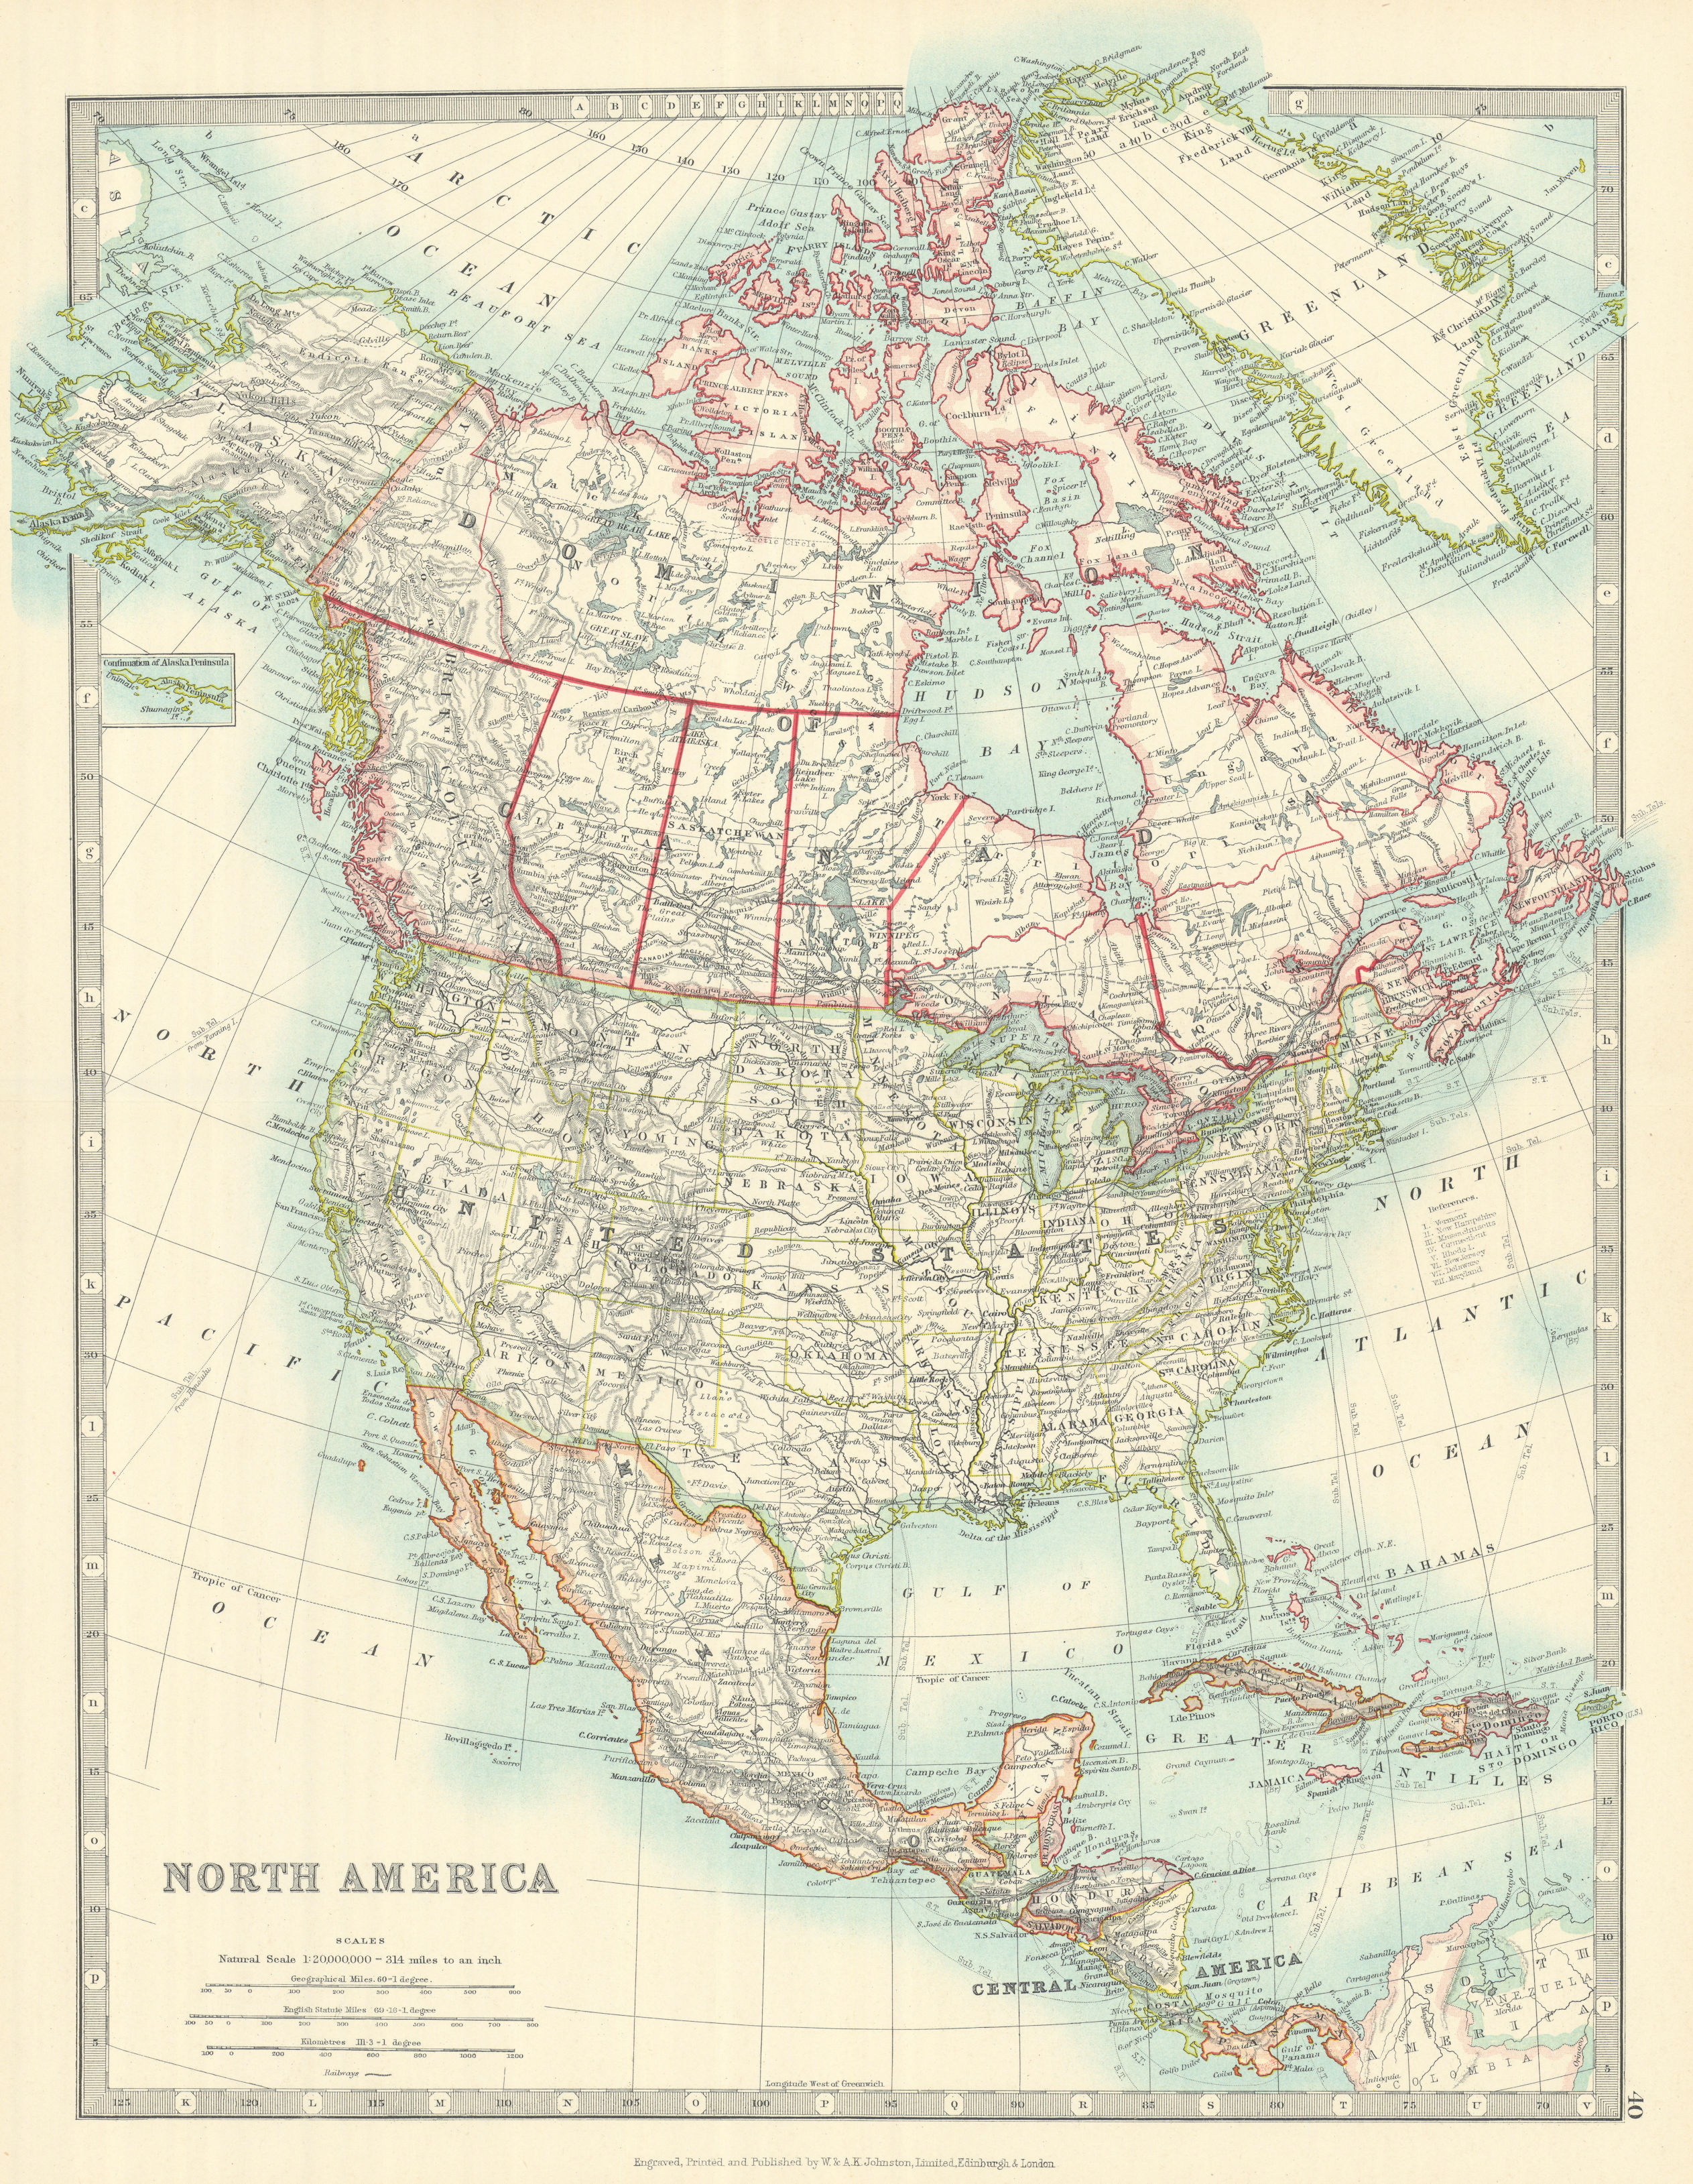 Associate Product NORTH AMERICA. United States Canada Mexico. Railways. JOHNSTON 1913 old map